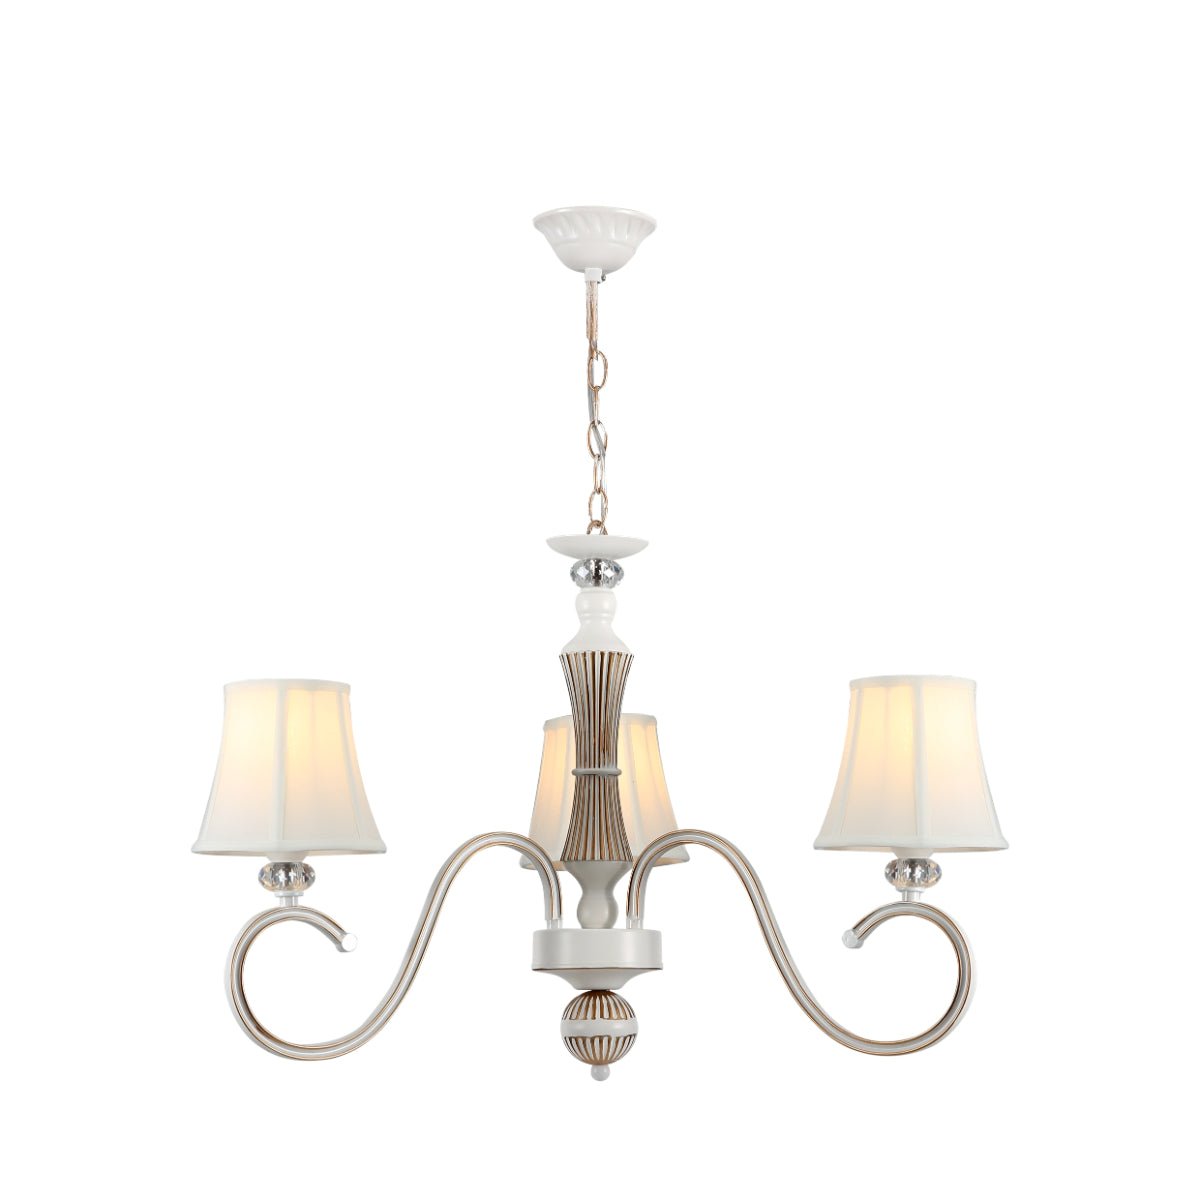 Main image of Off White Fabric Shaded Gold Aged Ivory Traditional Retro Vintage Classic Chandelier Ceiling Light with 3xE14 Fitting | TEKLED 159-17834